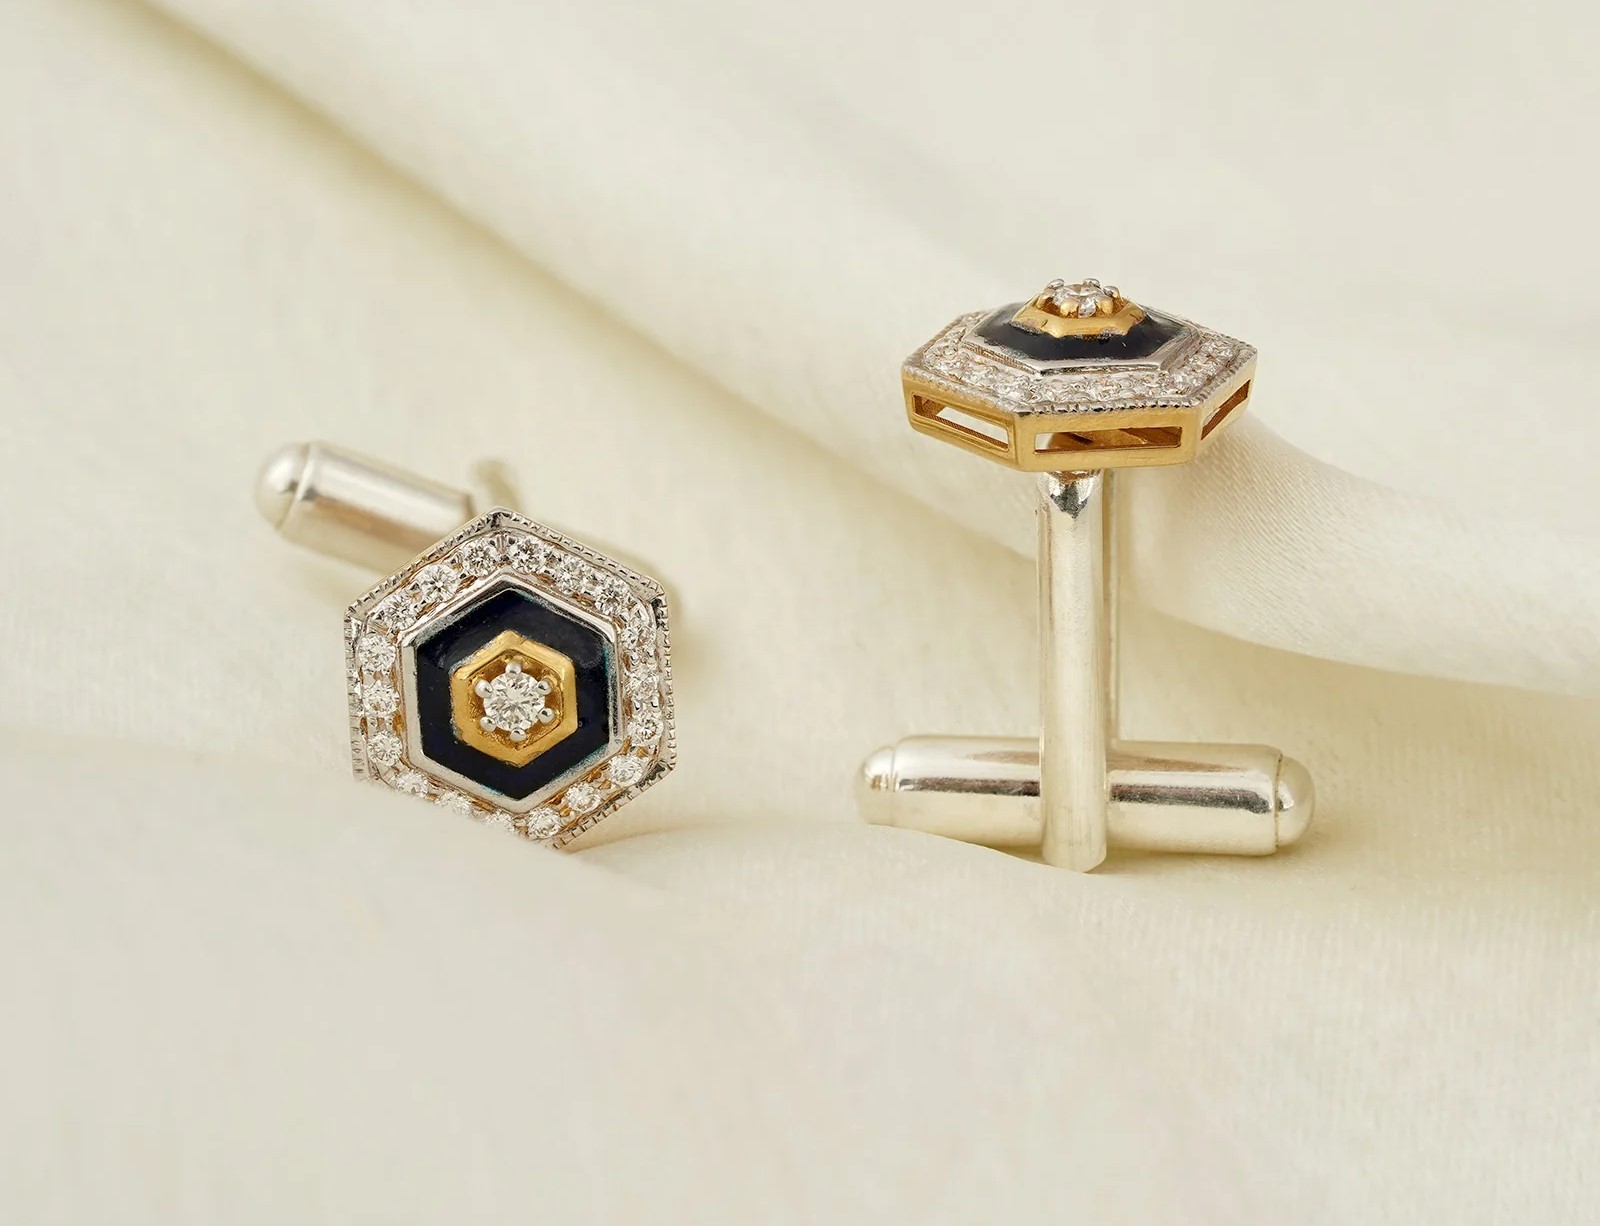 Cufflinks Review: The Perfect Accessory for Any Occasion